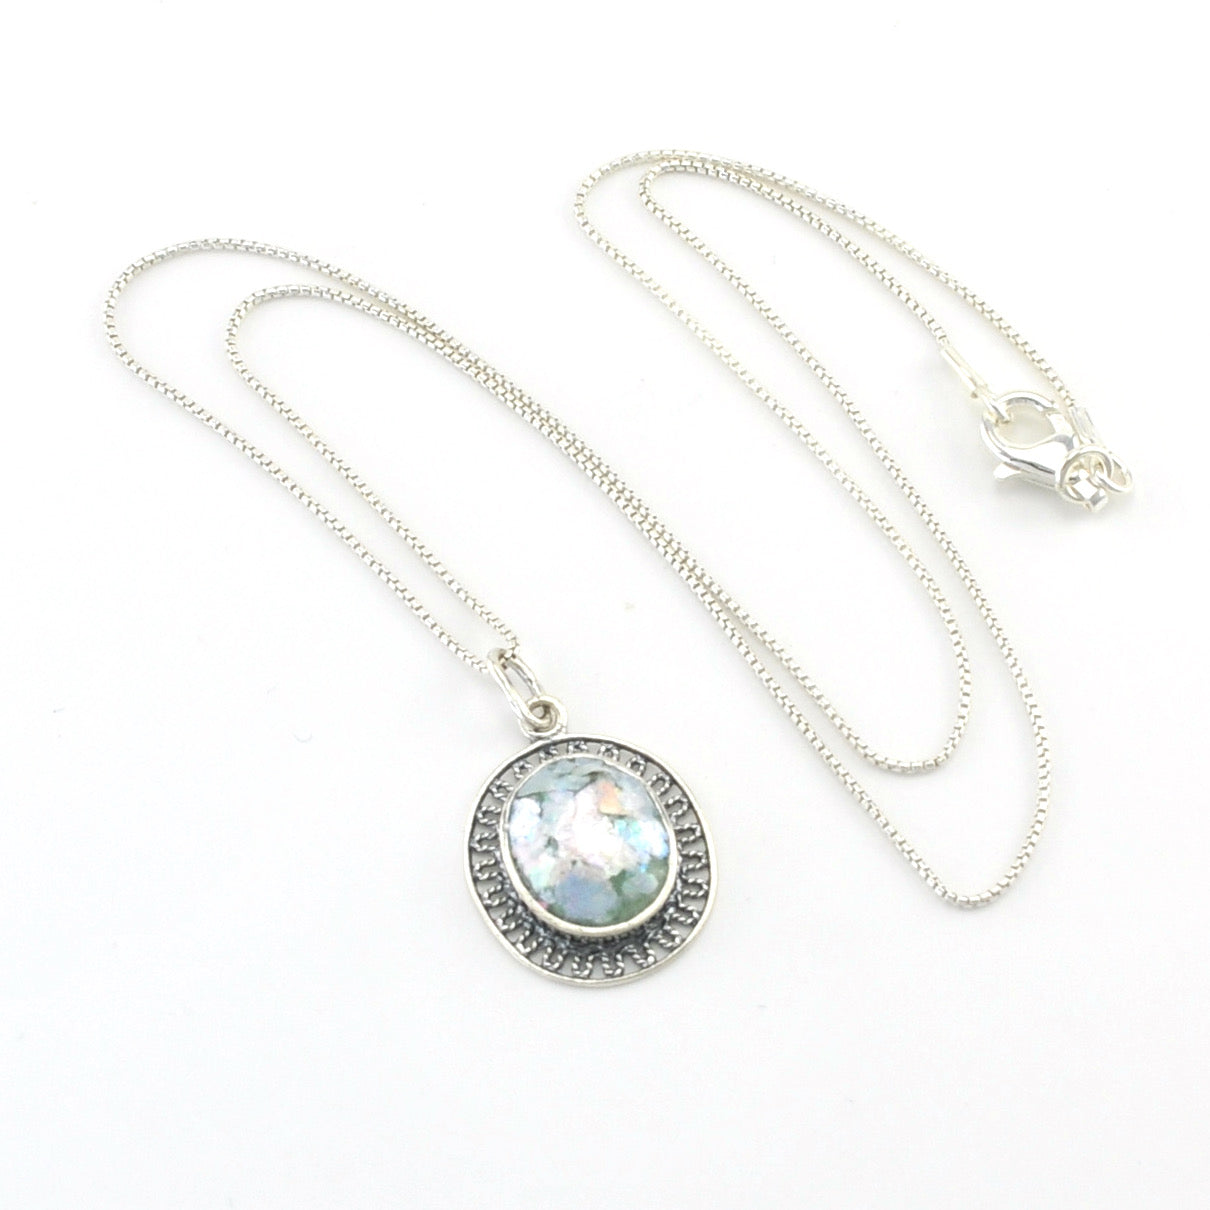 Silver Roman Glass Oval Necklace